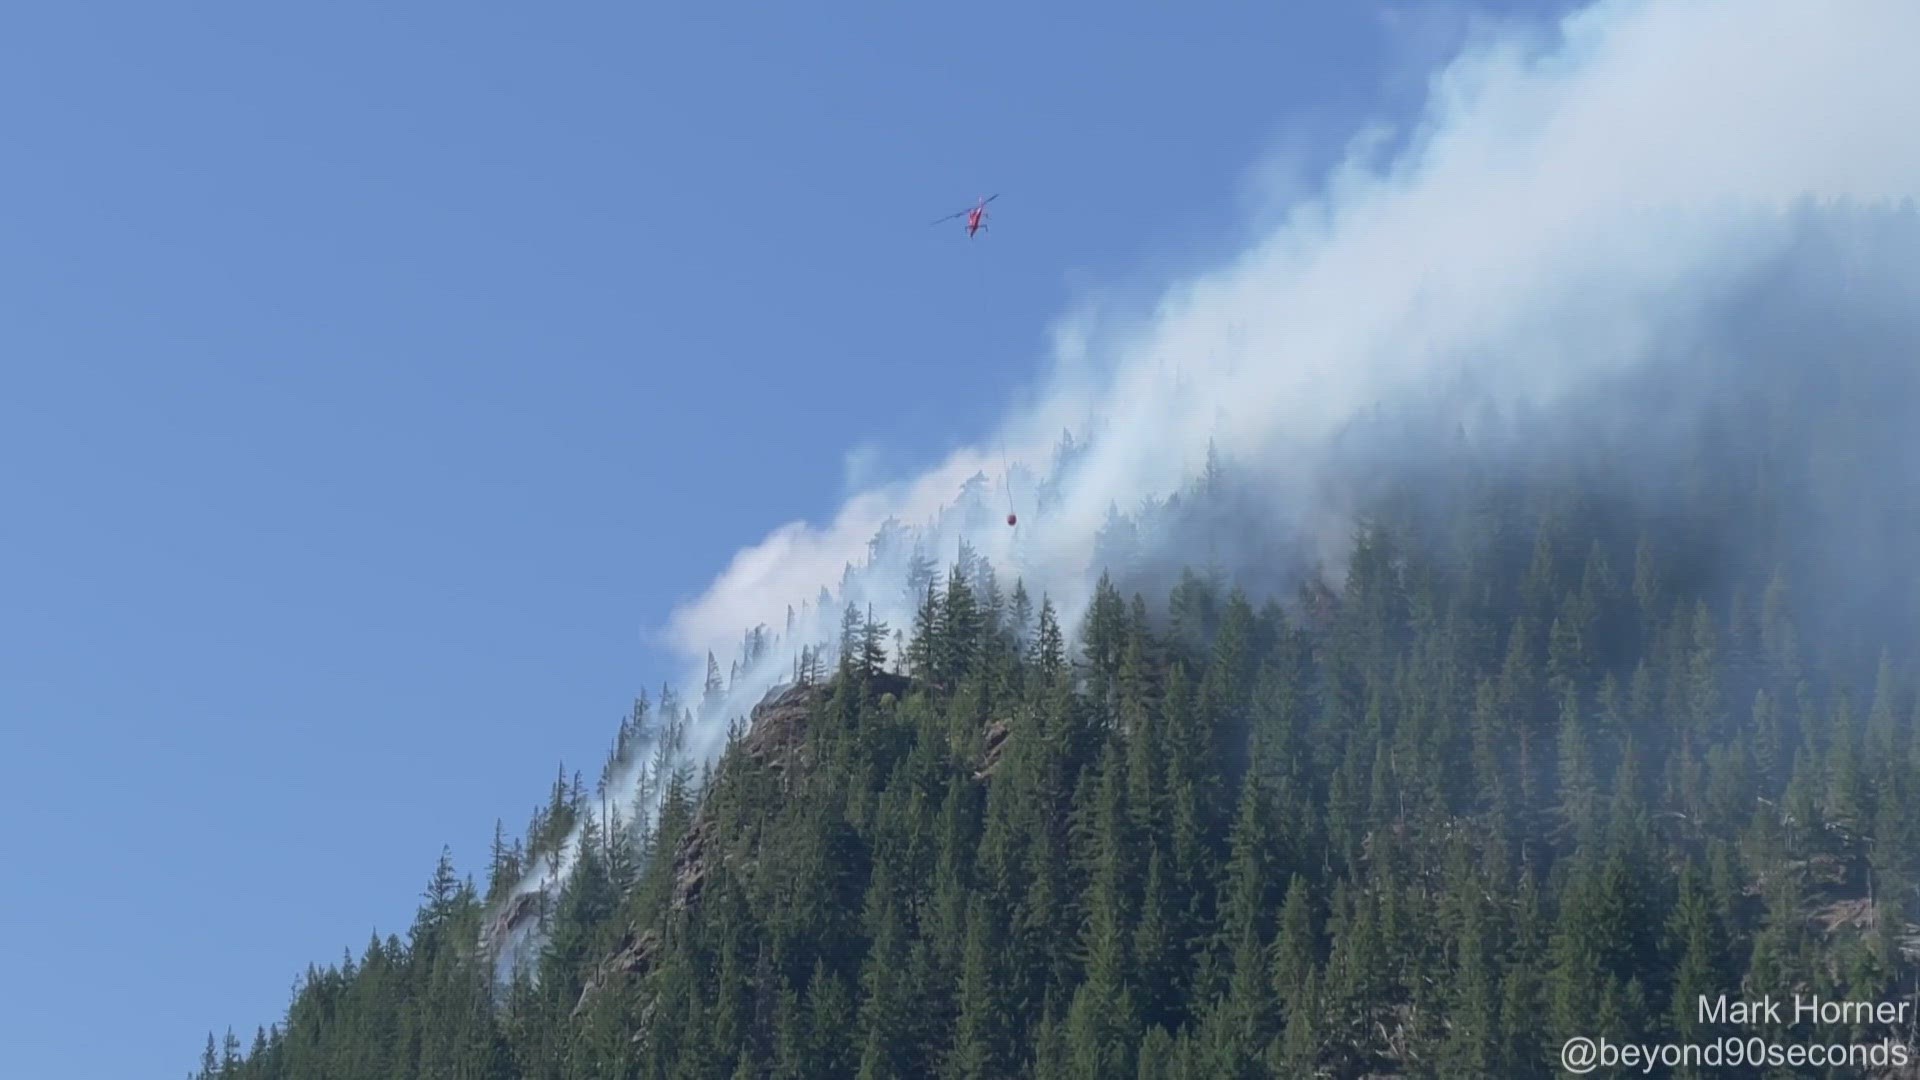 The fire began in the North Cascades Park in late July.